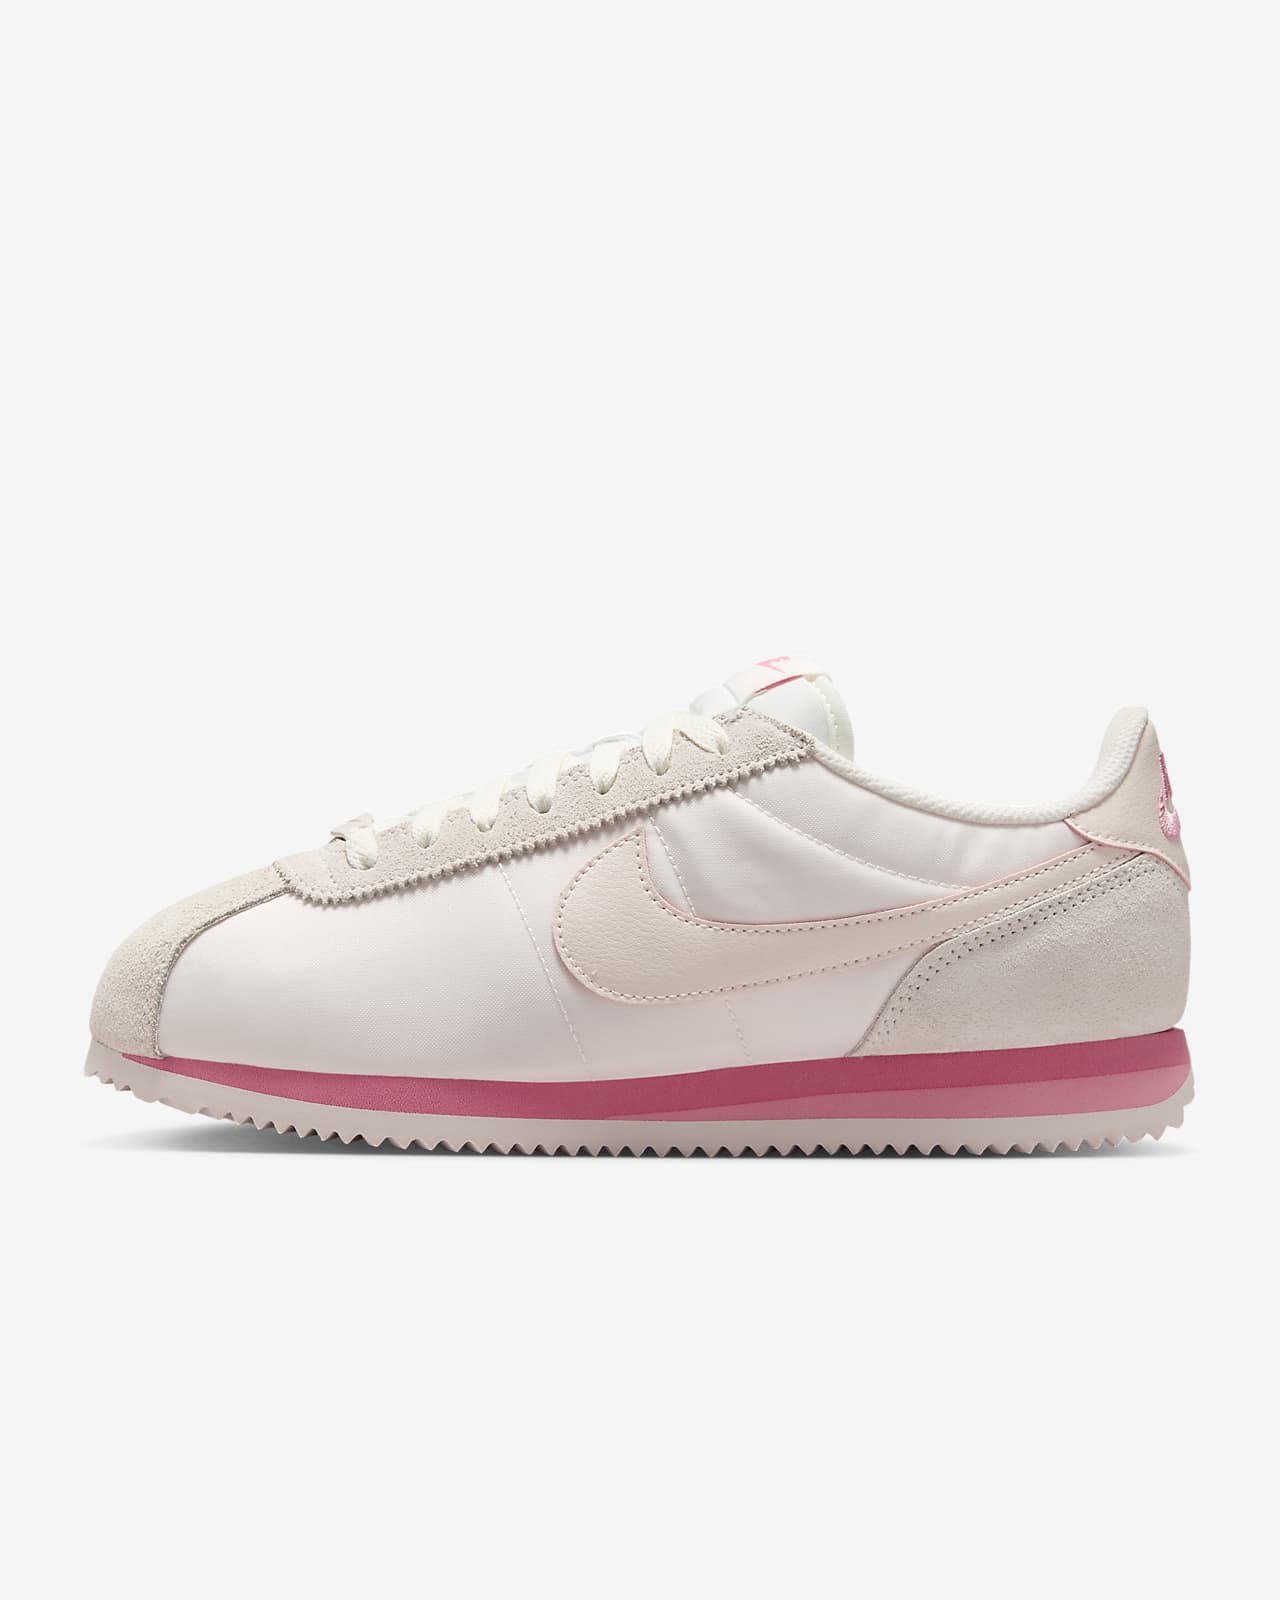 Buy Nike Women's Classic Cortez Sneakers 7 M US Smokey Mauve/Partical Beige  at Amazon.in